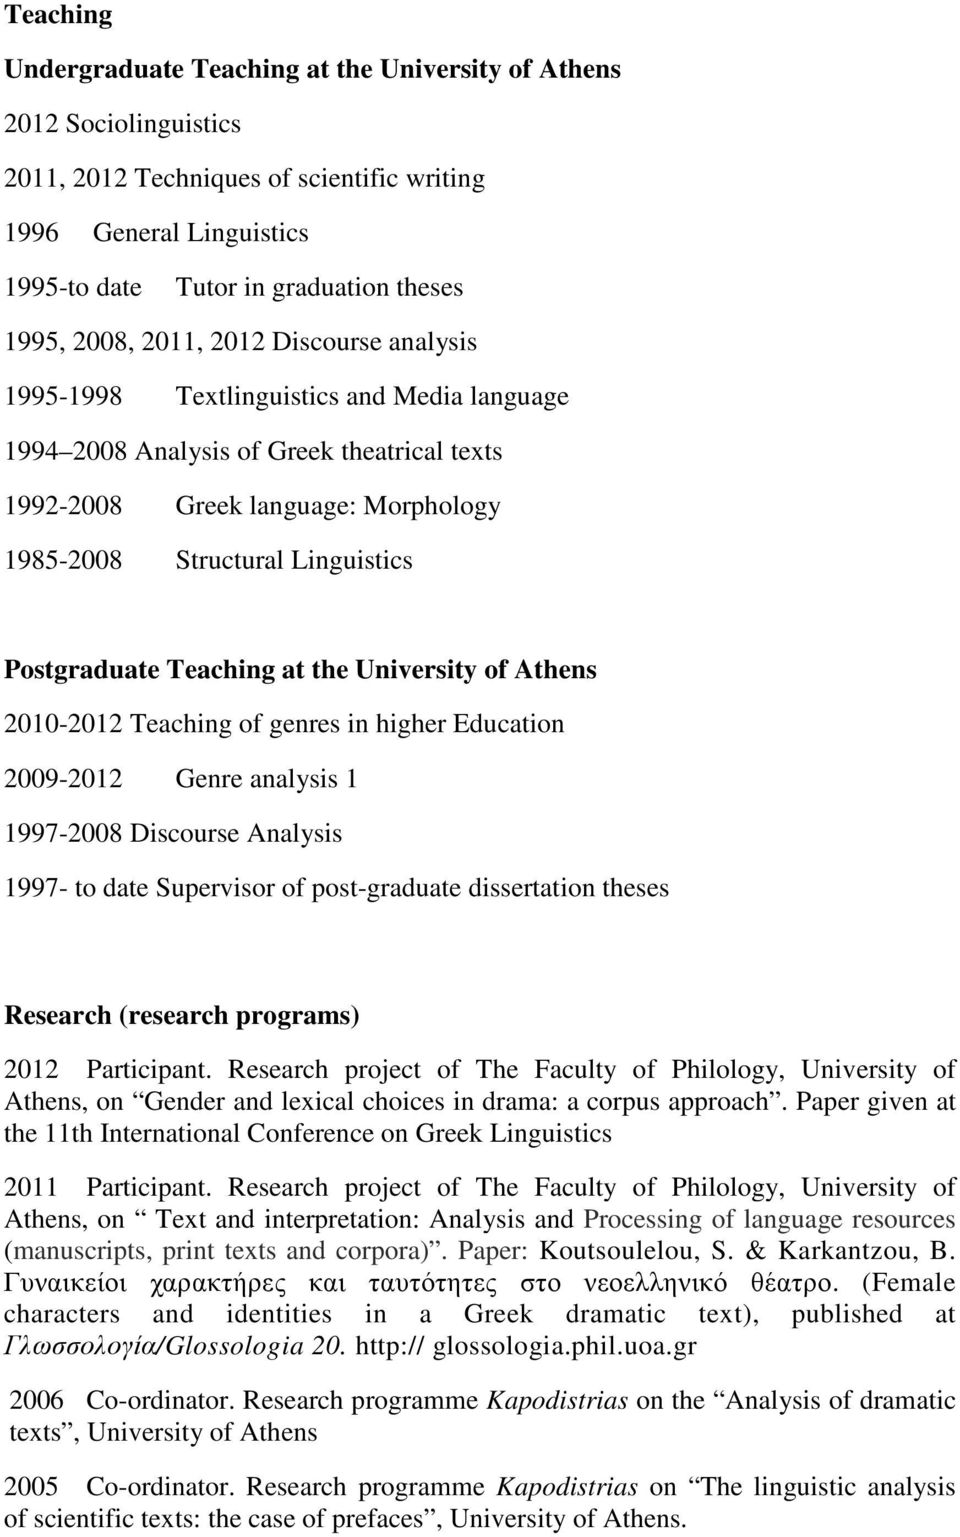 Postgraduate Teaching at the University of Athens 2010-2012 Teaching of genres in higher Education 2009-2012 Genre analysis 1 1997-2008 Discourse Analysis 1997- to date Supervisor of post-graduate